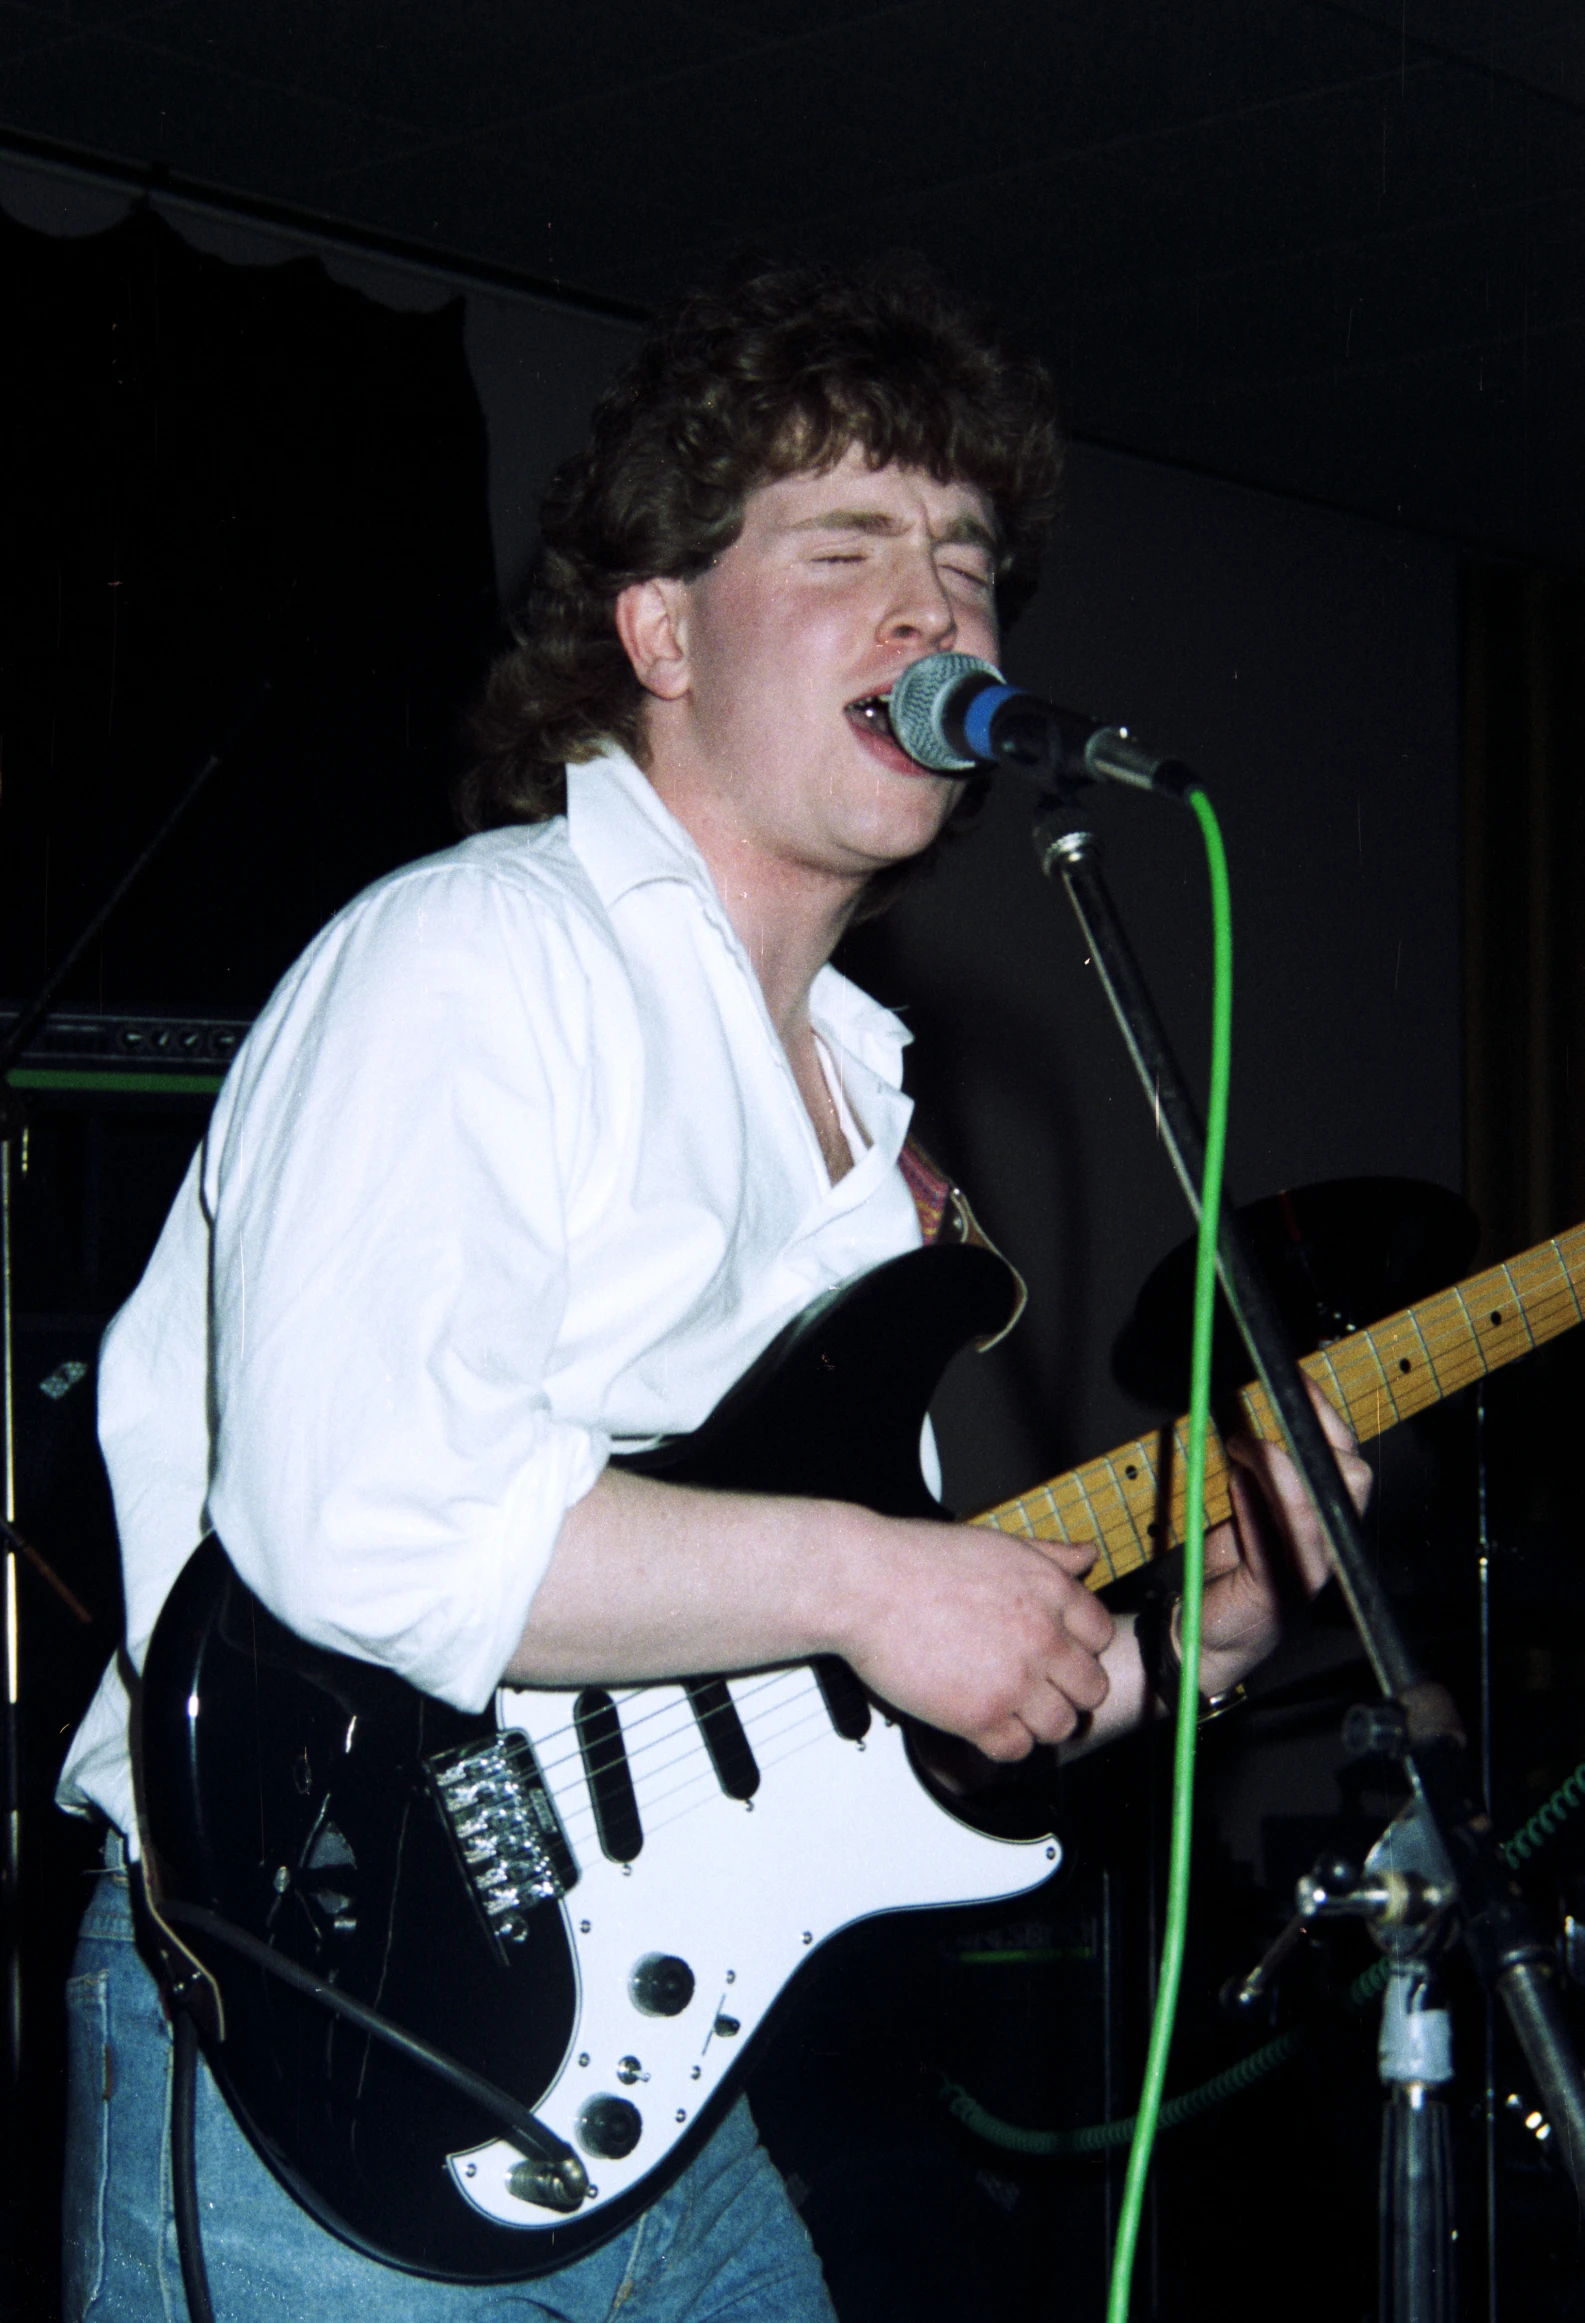 a man singing into a microphone while holding an electric guitar